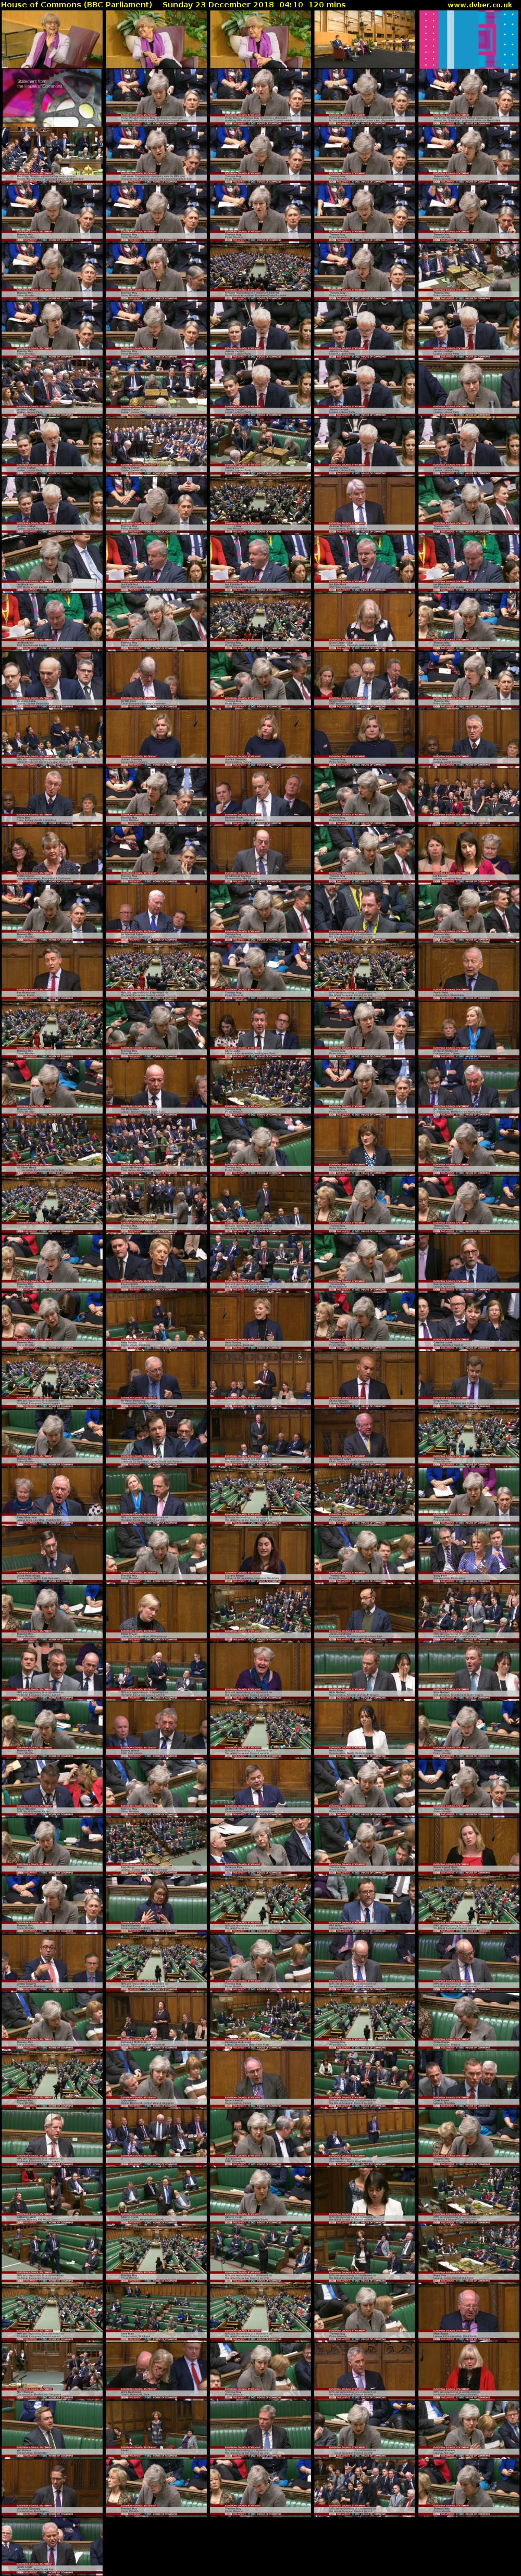 House of Commons (BBC Parliament) Sunday 23 December 2018 04:10 - 06:10